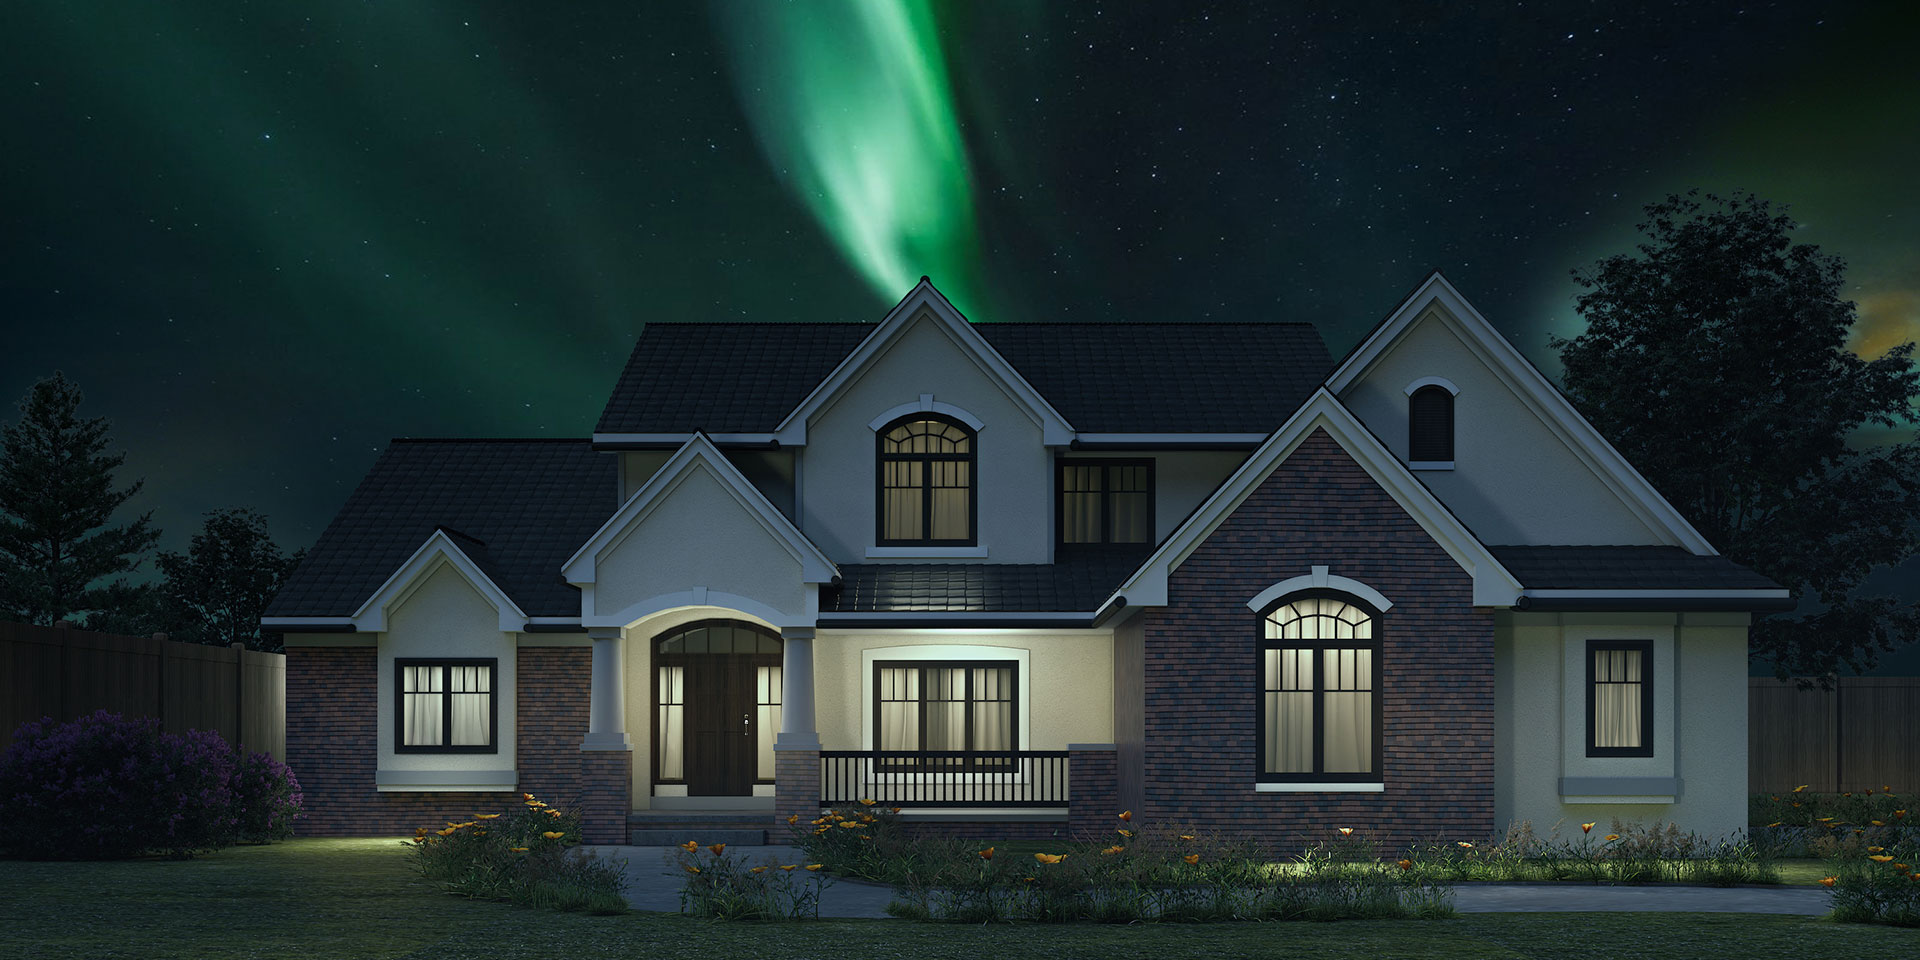 Rendering with Northern Lighting effects